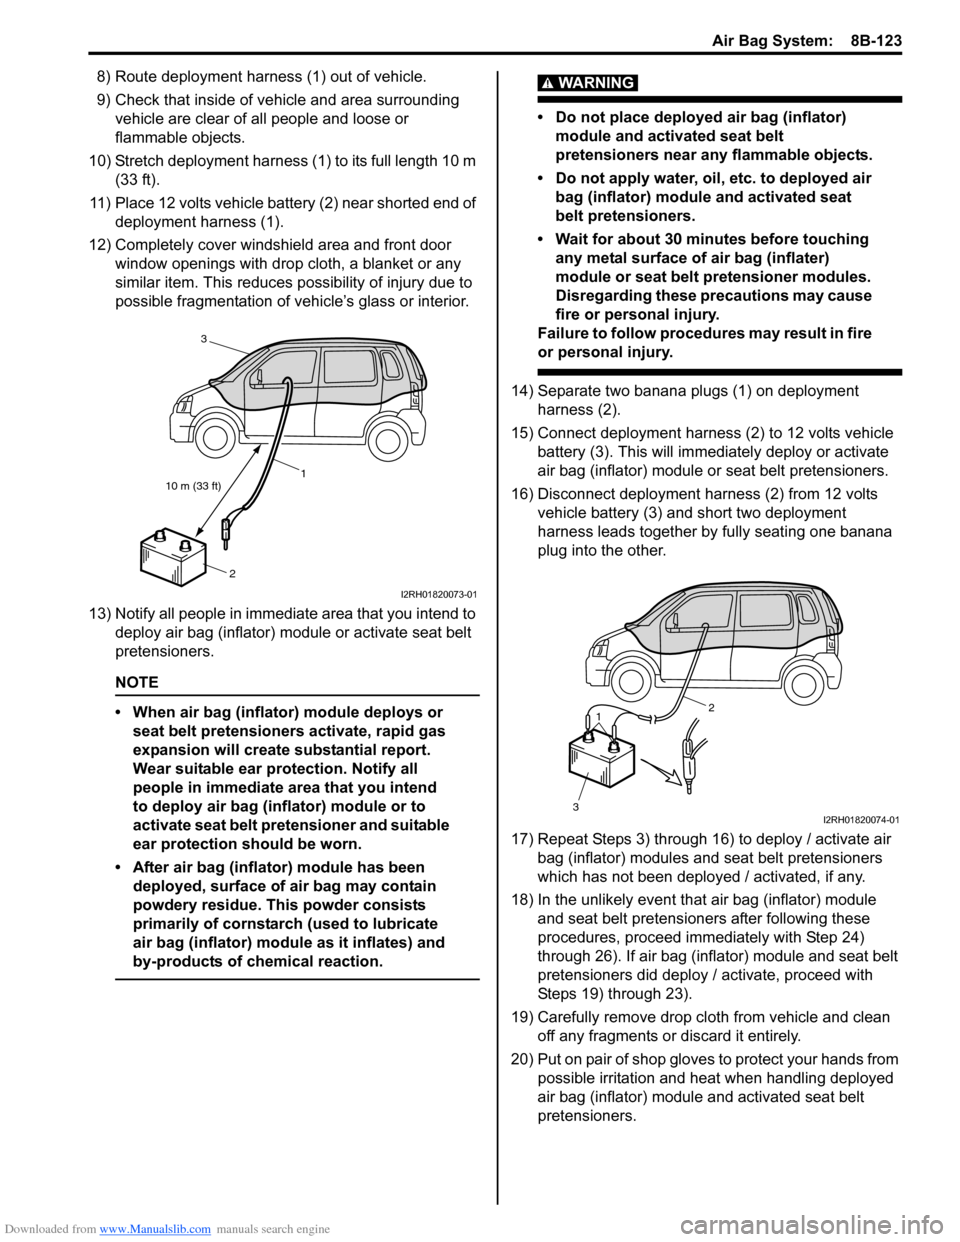 SUZUKI SWIFT 2006 2.G Service Workshop Manual Downloaded from www.Manualslib.com manuals search engine Air Bag System:  8B-123
8) Route deployment harness (1) out of vehicle.
9) Check that inside of vehicle and area surrounding vehicle are clear 